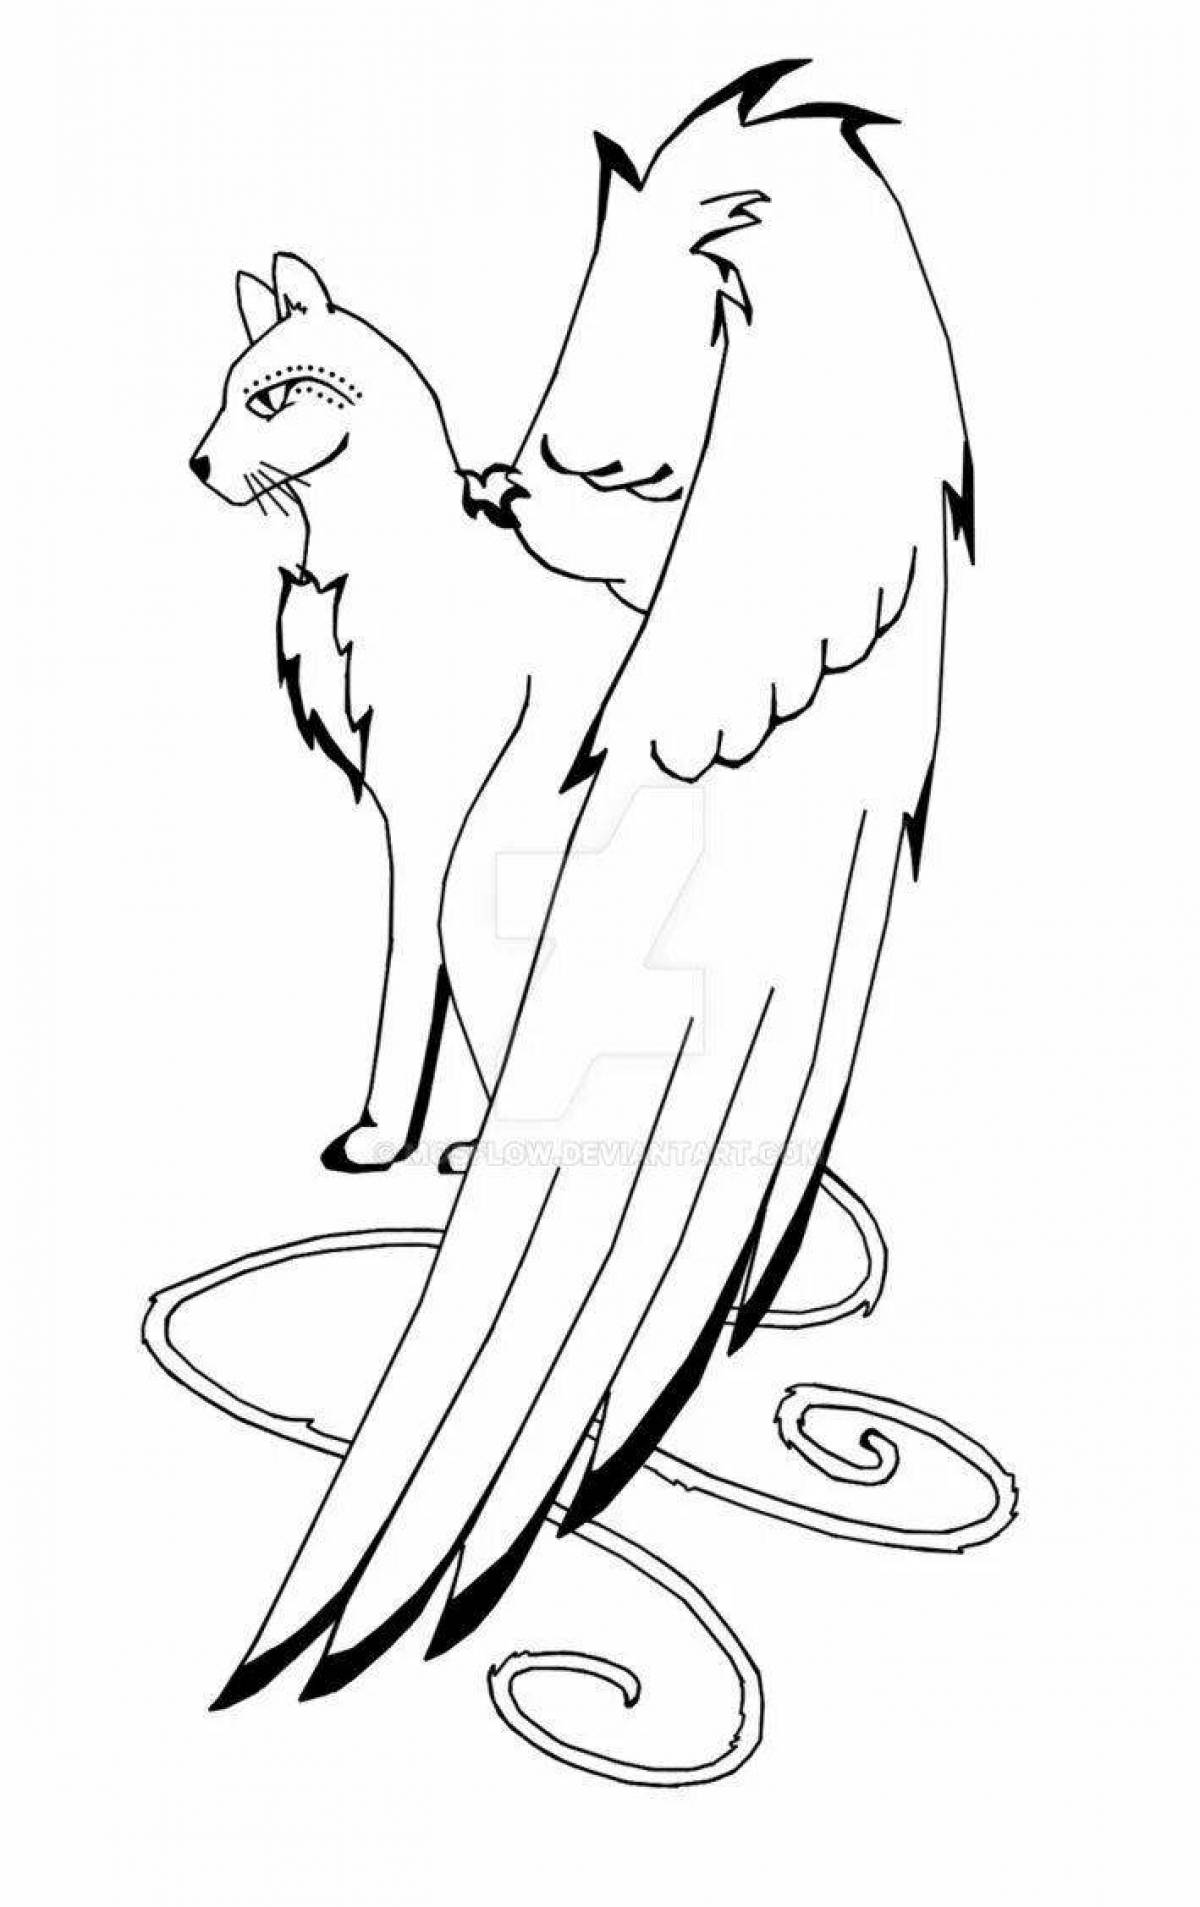 Colorful flying cat coloring page